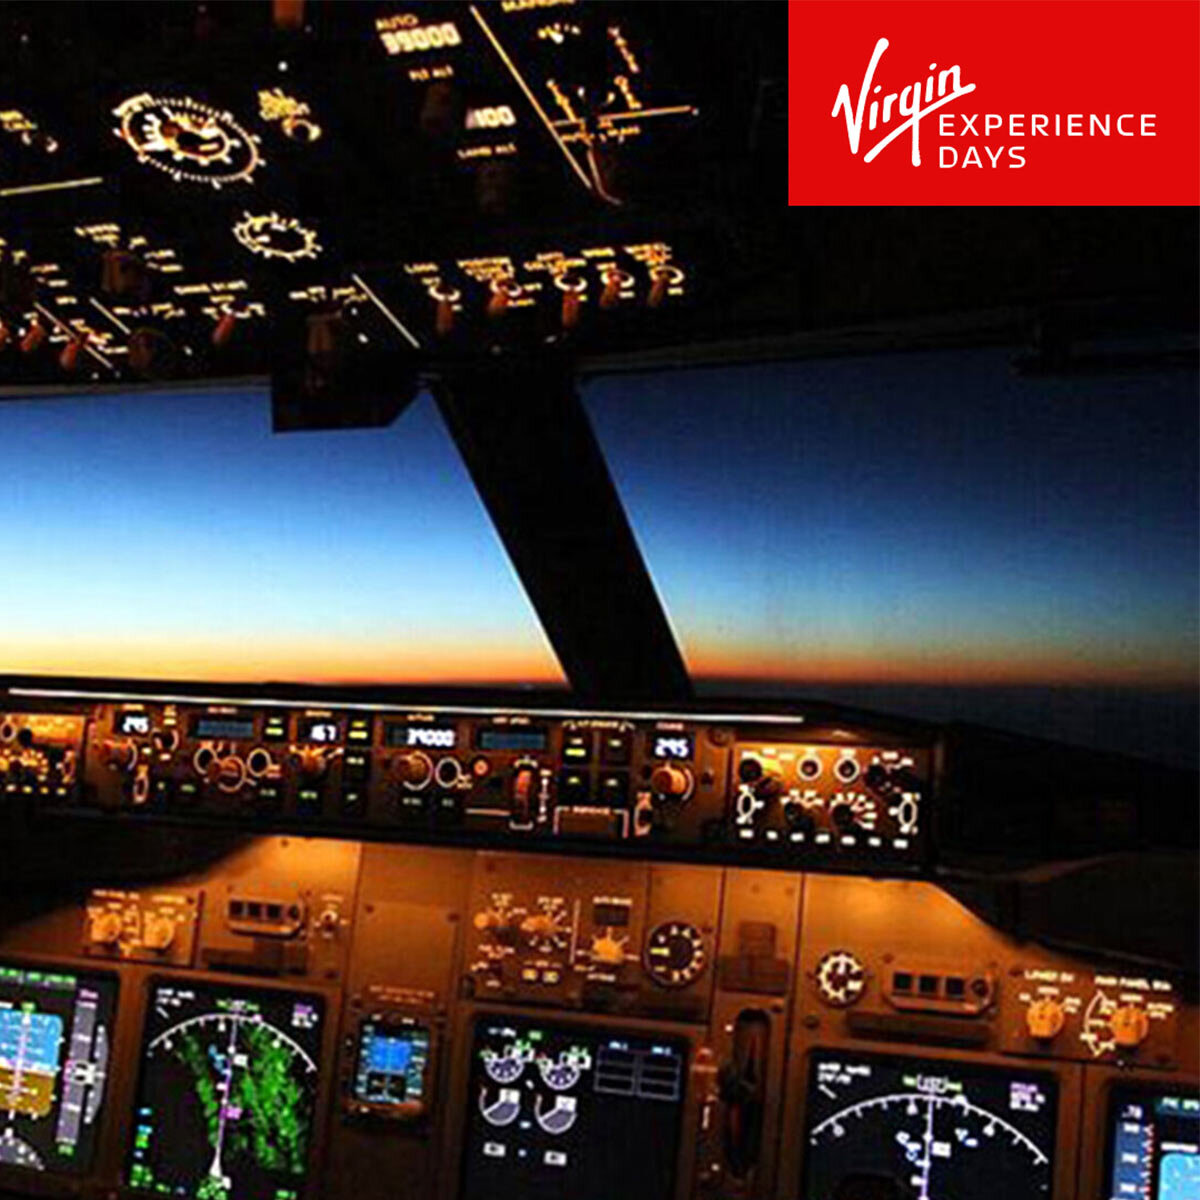 Virgin Experience Days Boeing 737 Flight Simulator Experience For One Person (12 Years +)